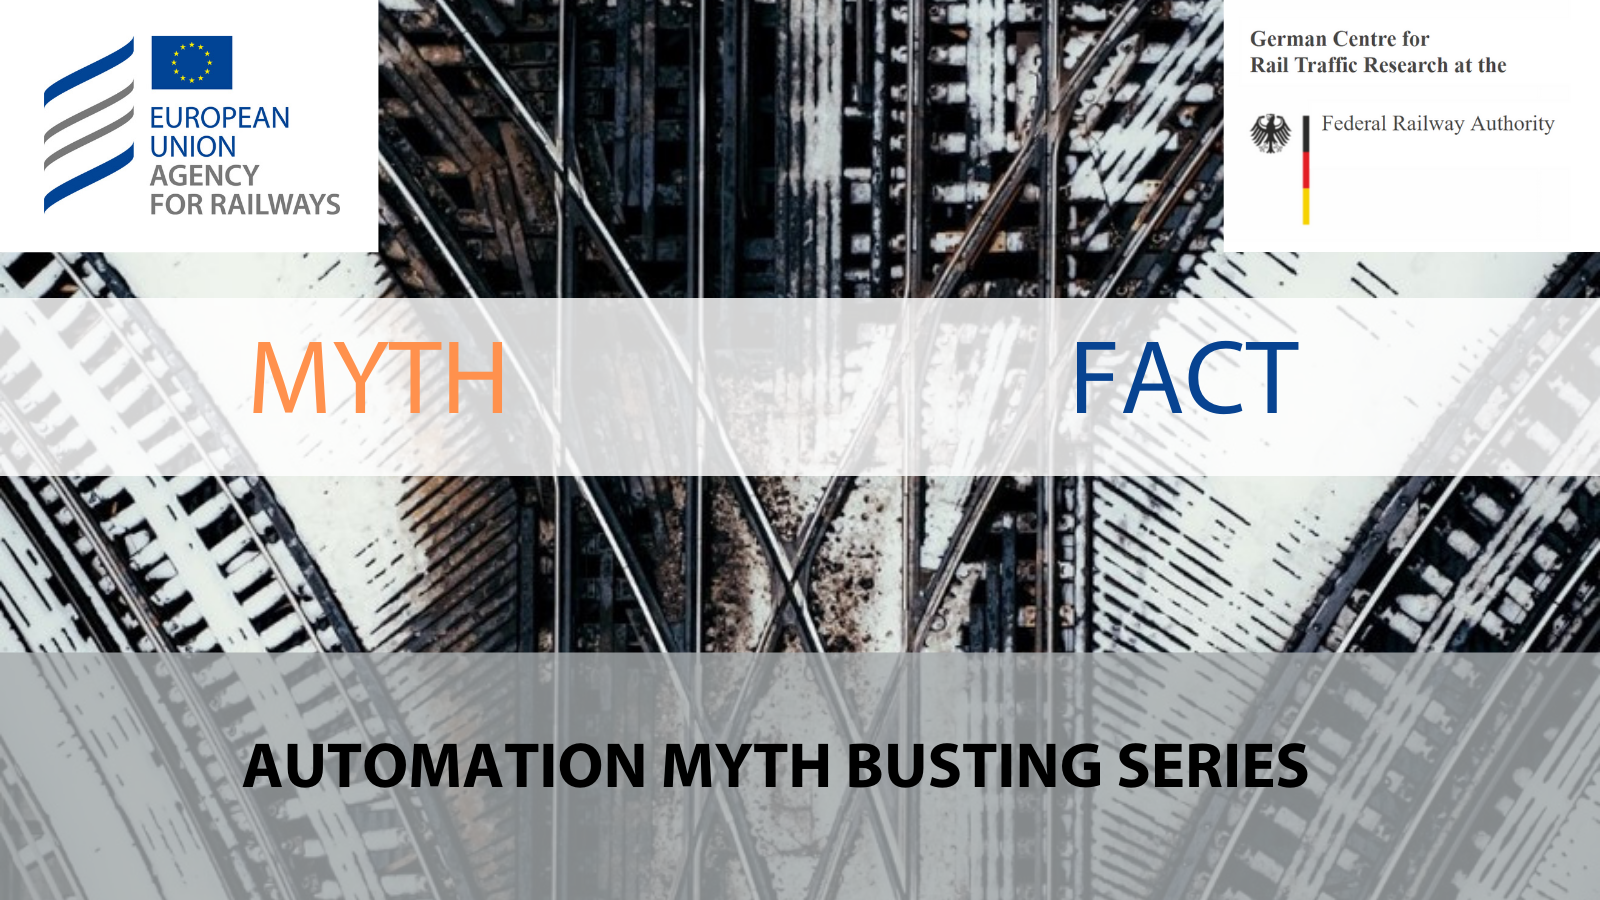 Myths Versus Facts in Automation_ Why We Humans Will Still Matter